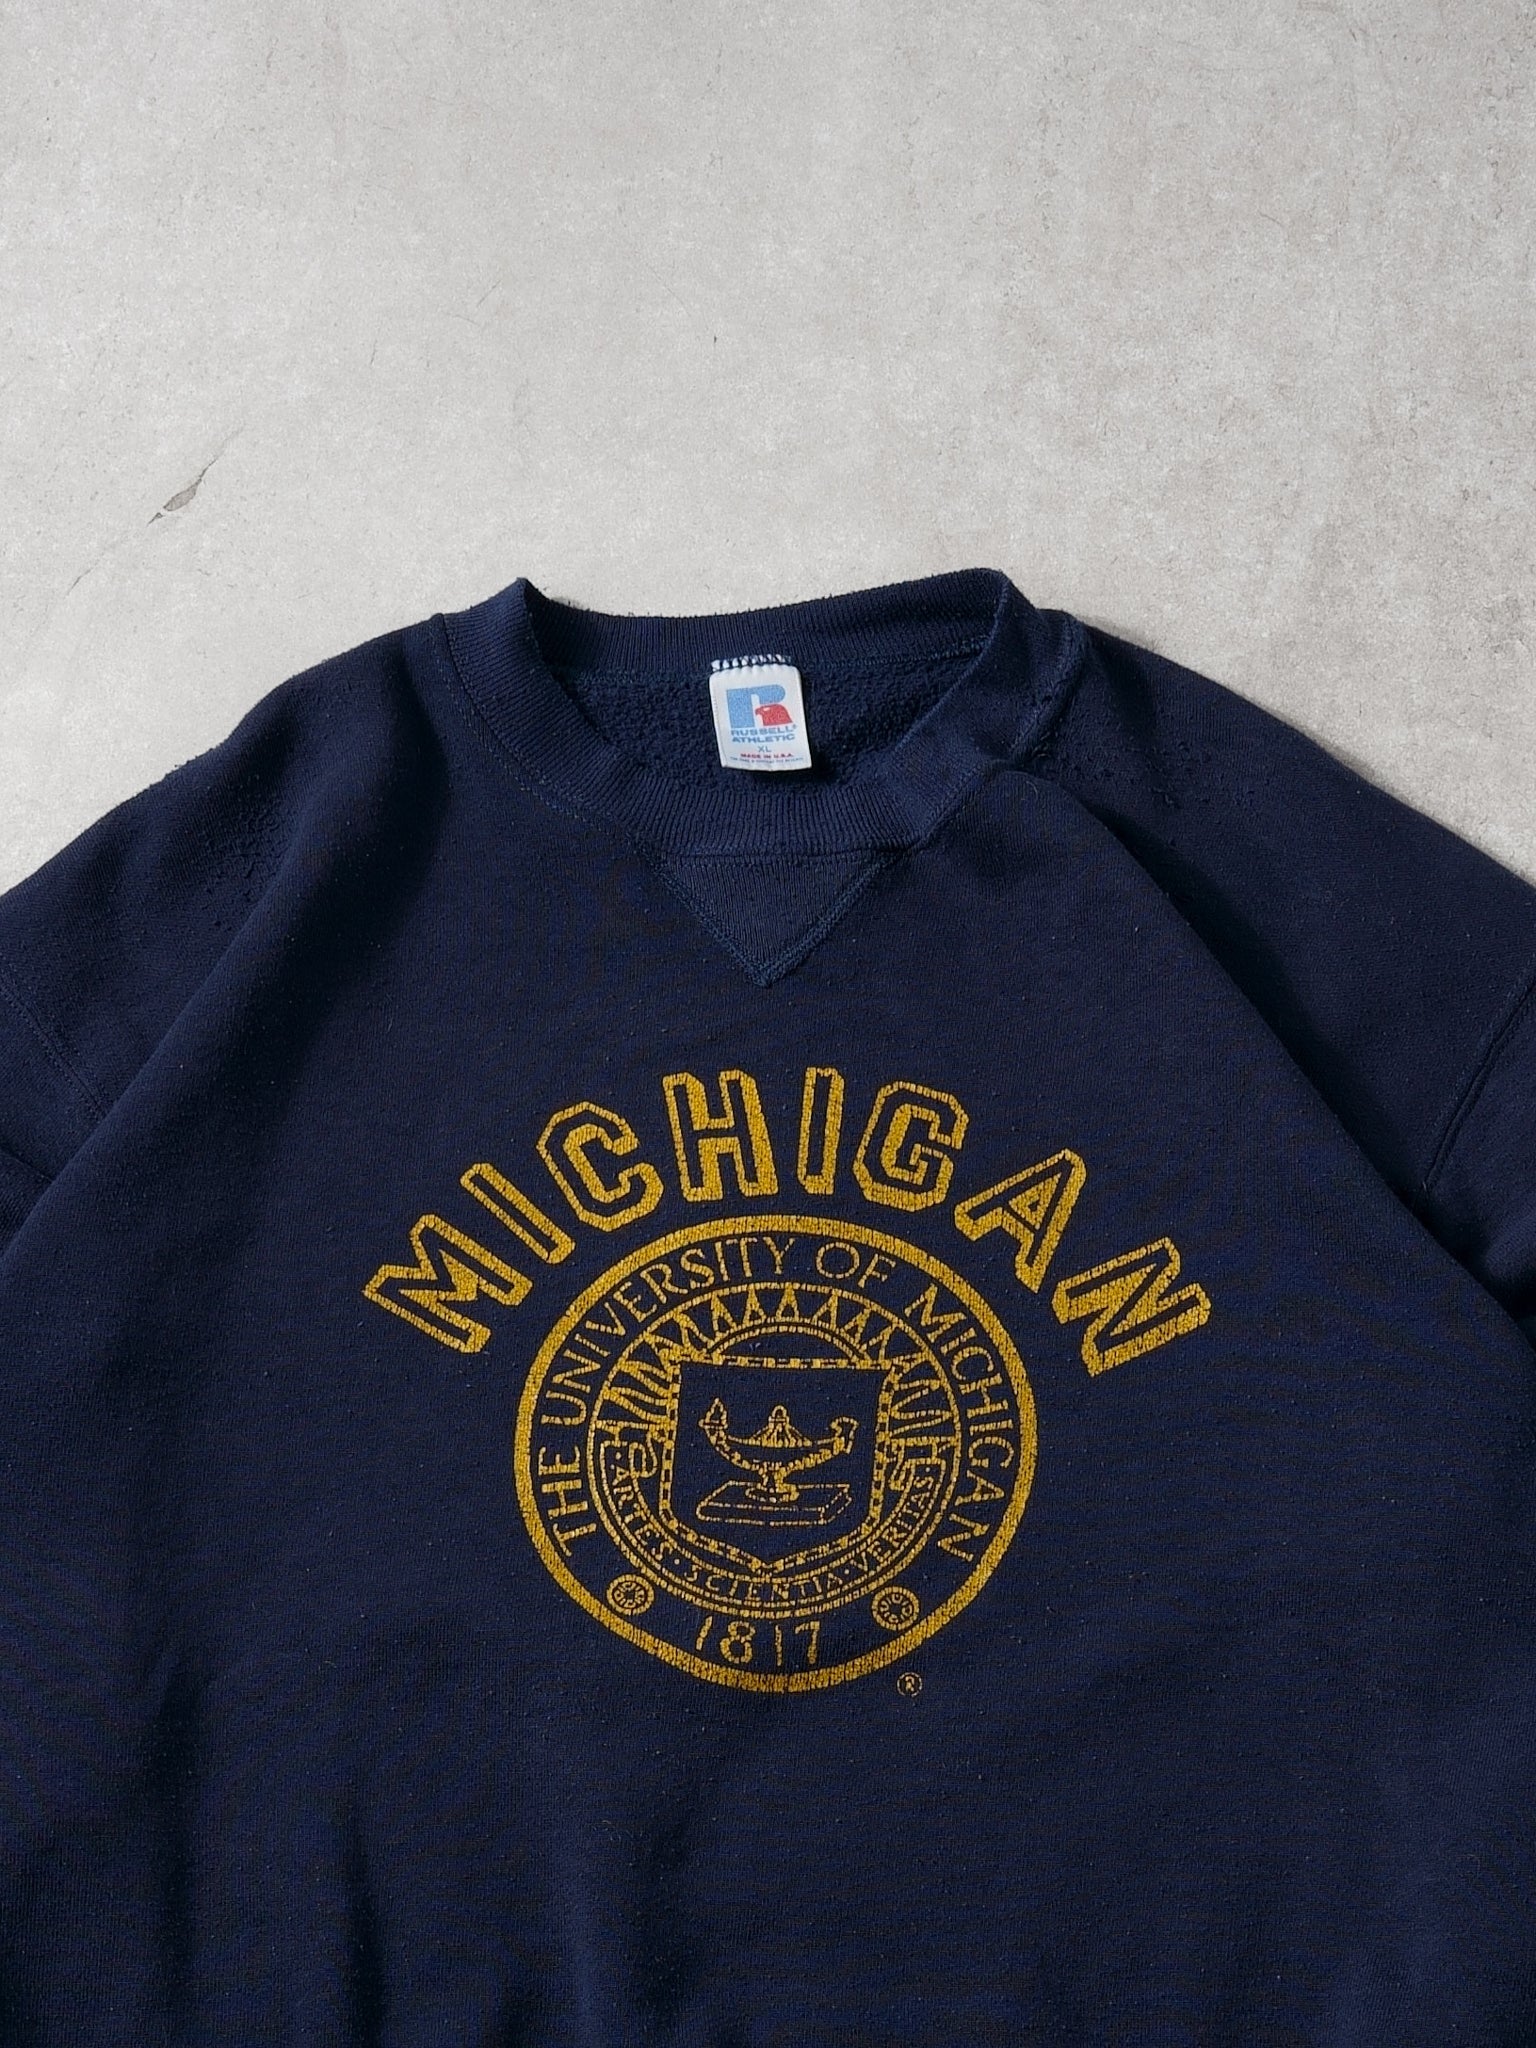 Vintage 80s Navy Blue and Yellow University of Michigan Russell Athletics Crewneck (L)